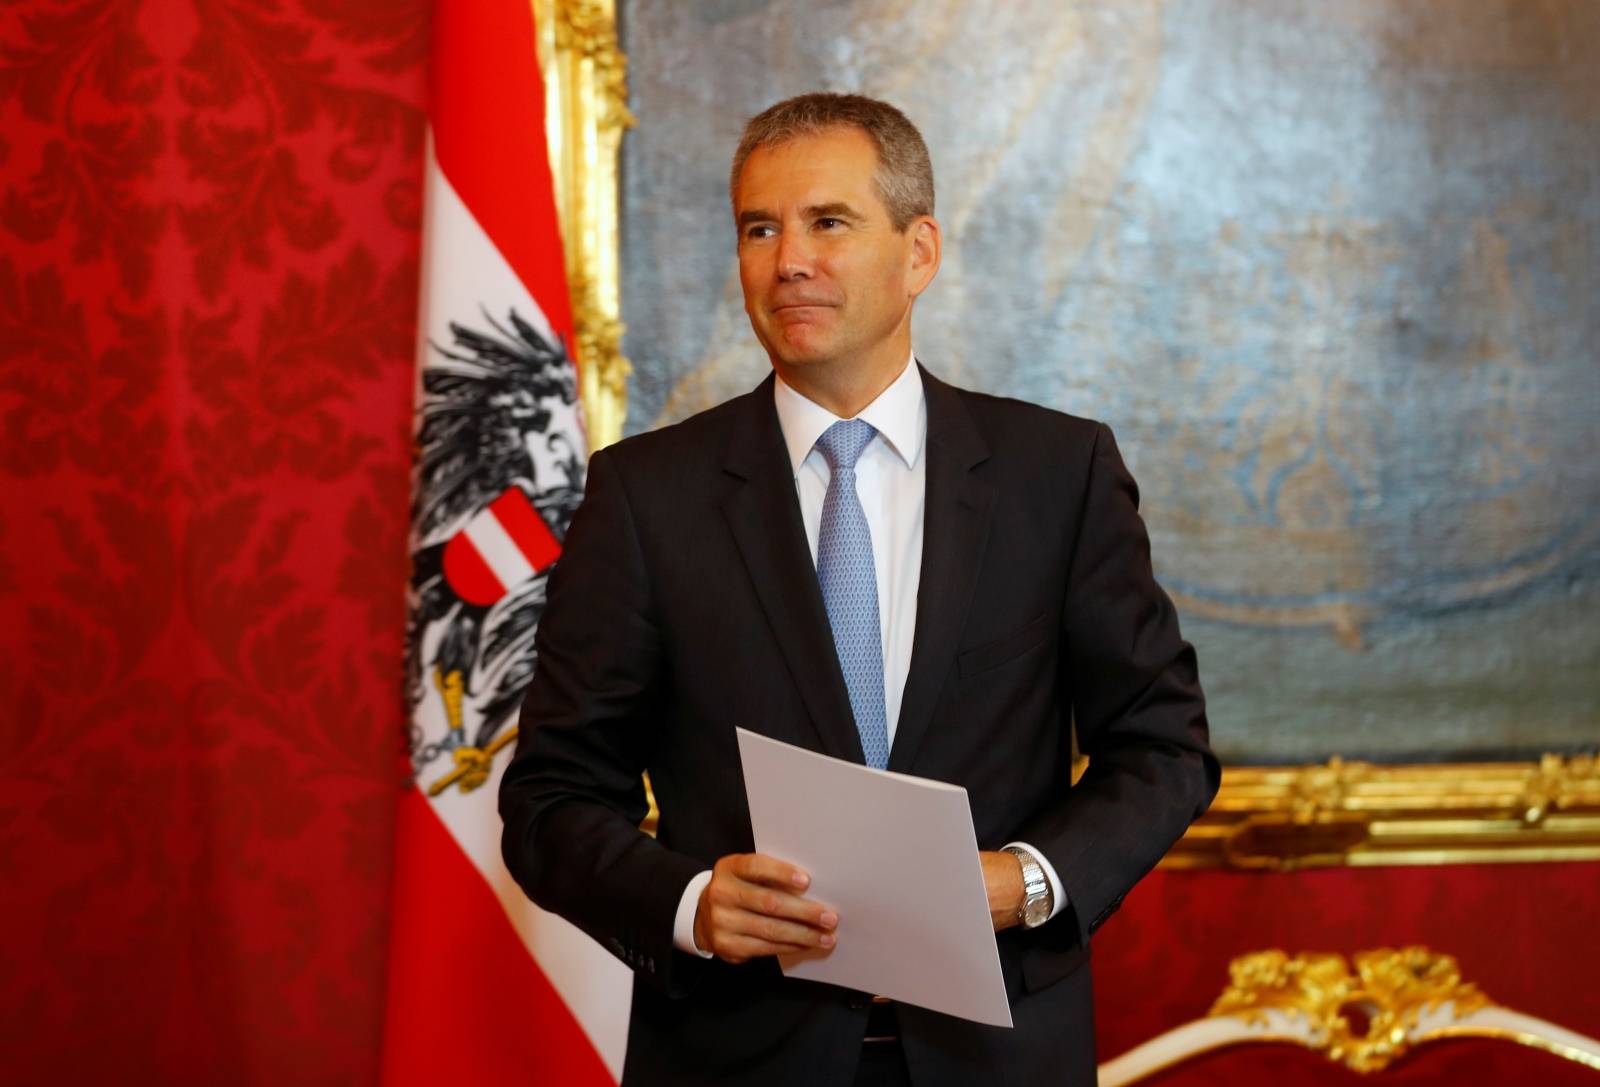 Hartwig Loeger reacts after being sworn in as Austria's provisional chancellor by Austrian President Alexander Van der Bellen, after a no-confidence vote by the Parliament in Vienna